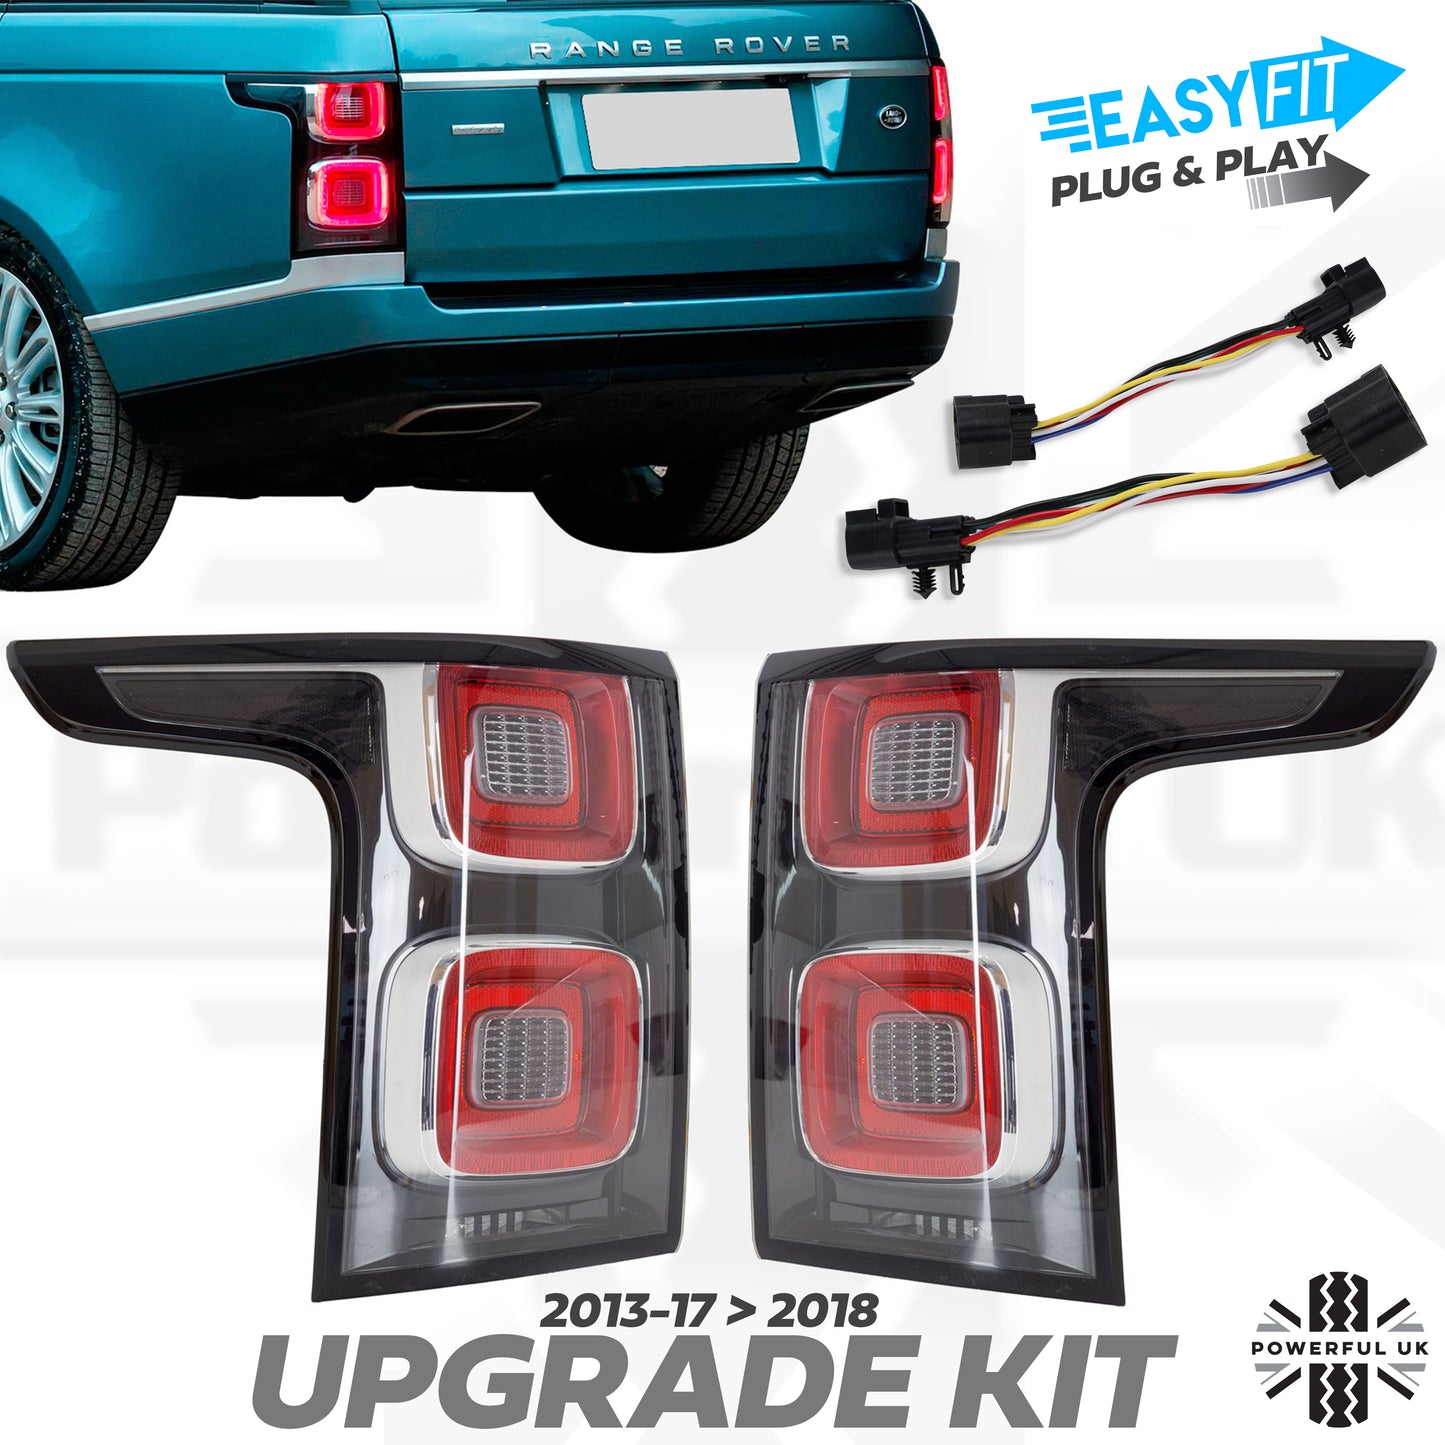 2018 Facelift Rear Light Conversion (re-wired for early cars) for Range Rover L405